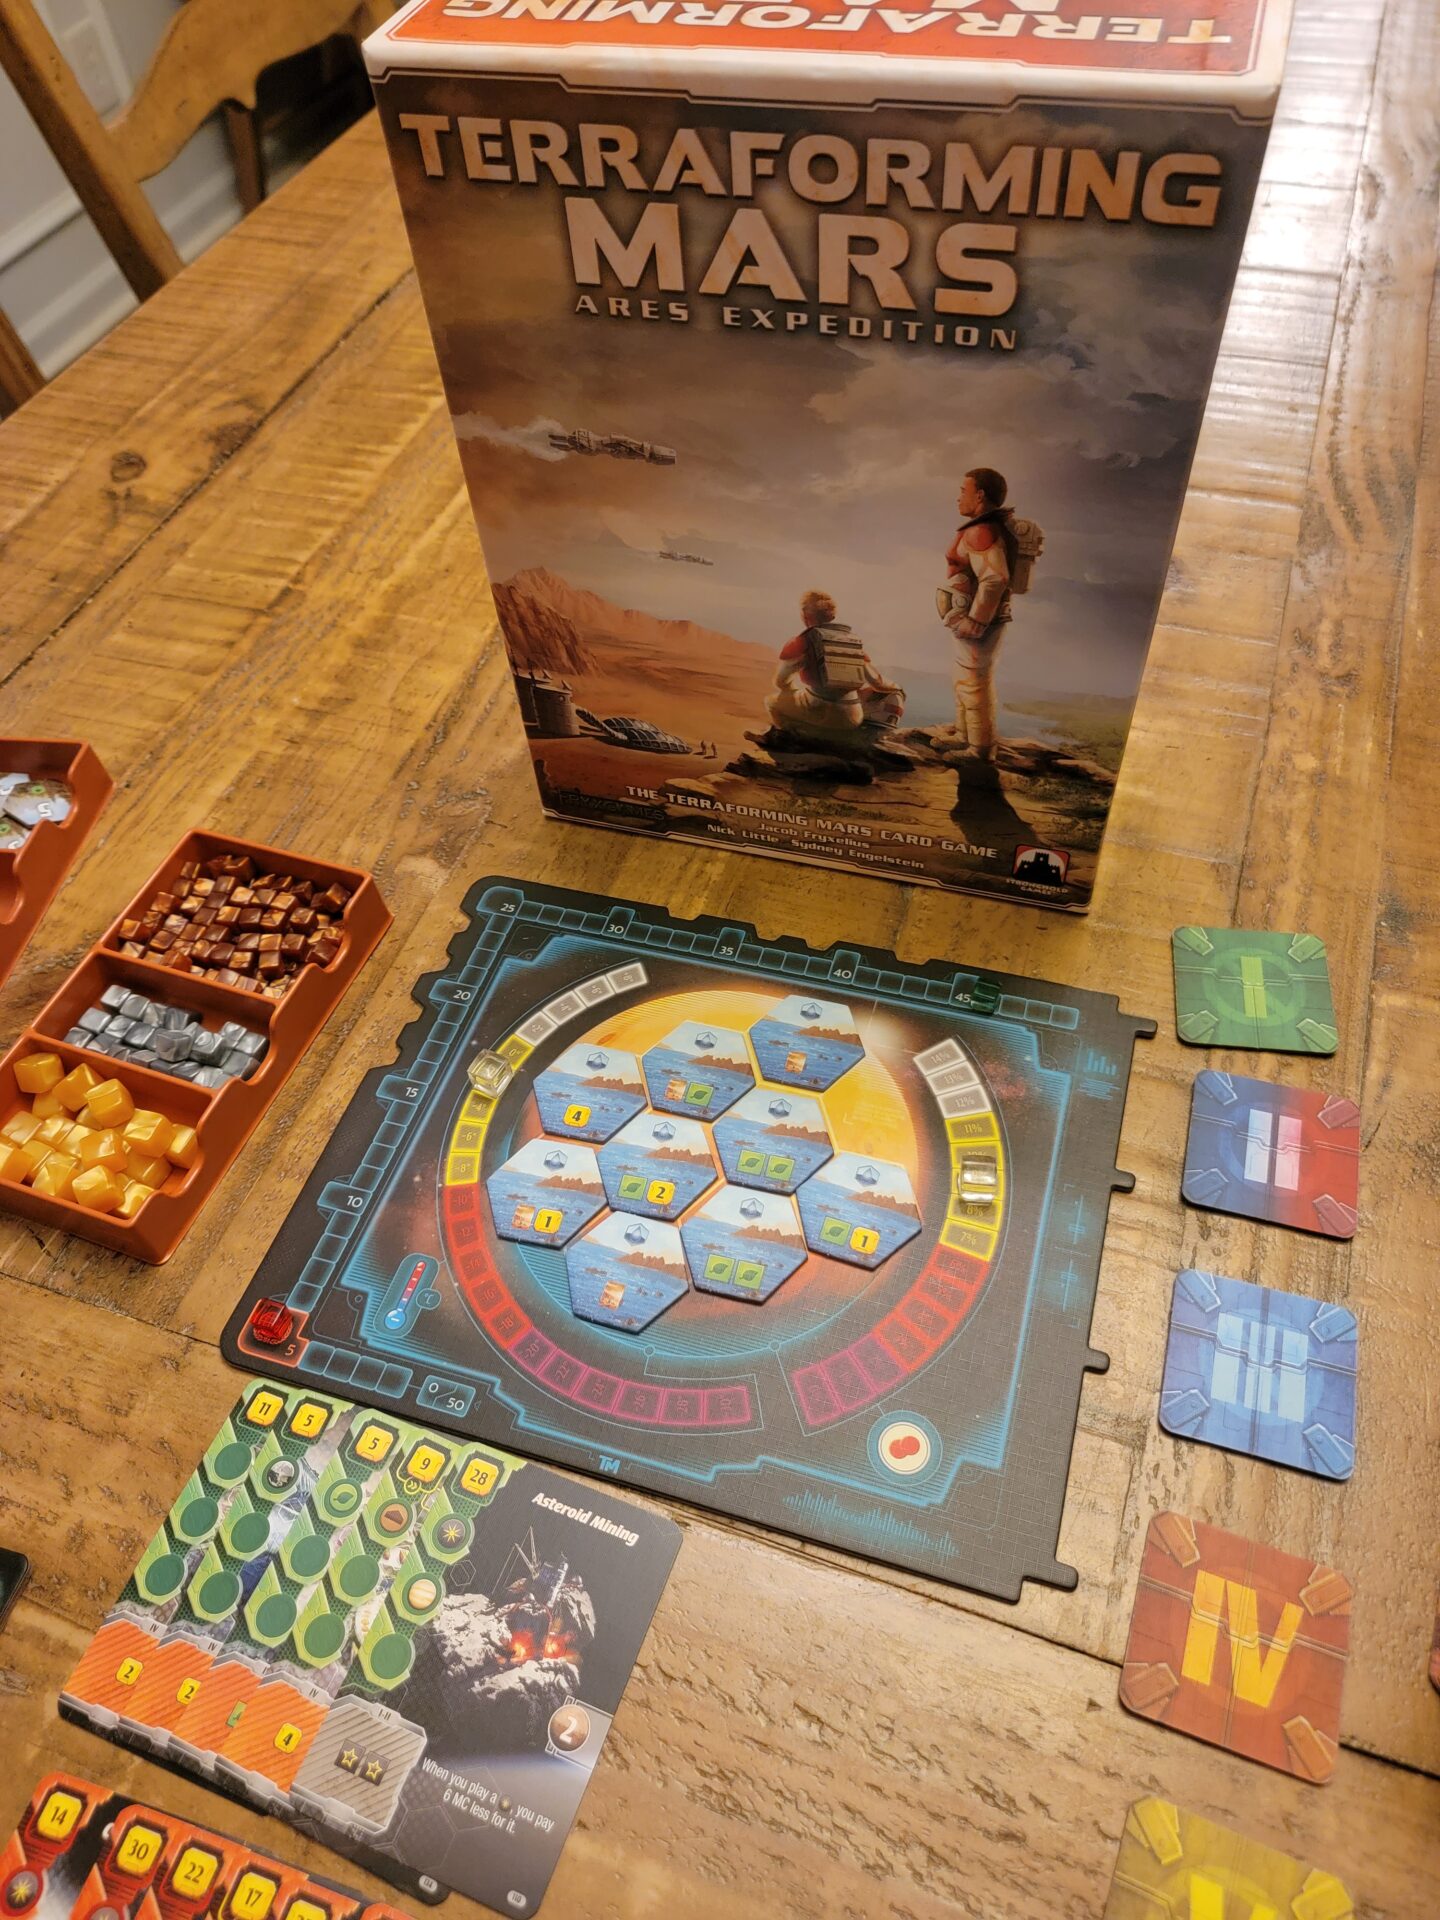 Terraforming Mars: Ares Expedition review: faster, but awkward